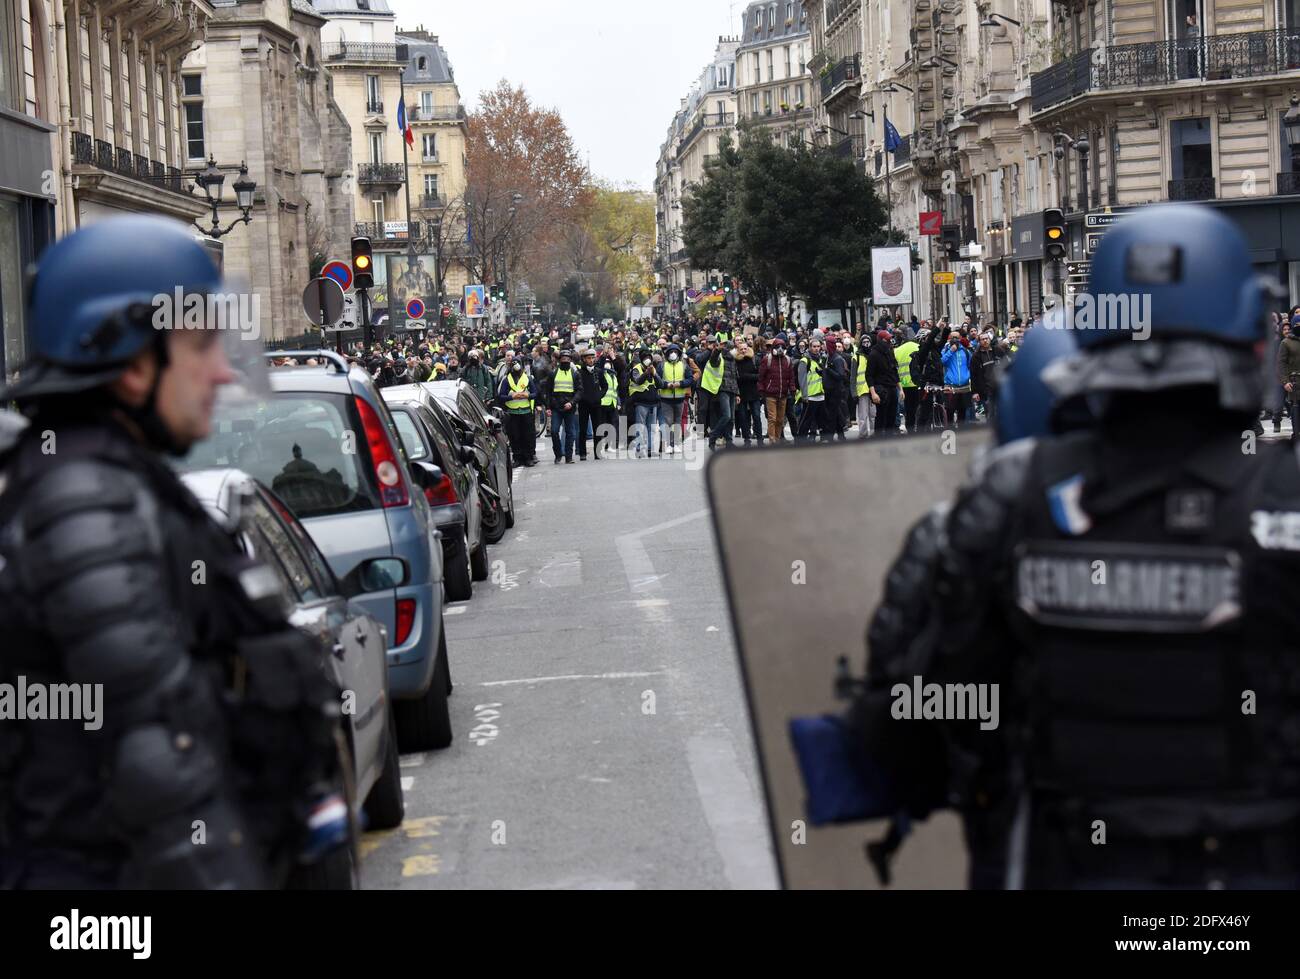 Police clash on Saturday december 8, 2018 in Paris, France, with protesters  staging a fourth weekend of "gilets jaunes," or "yellow vest,"  demonstrations against the government of President Macron. Officers fired  rubber